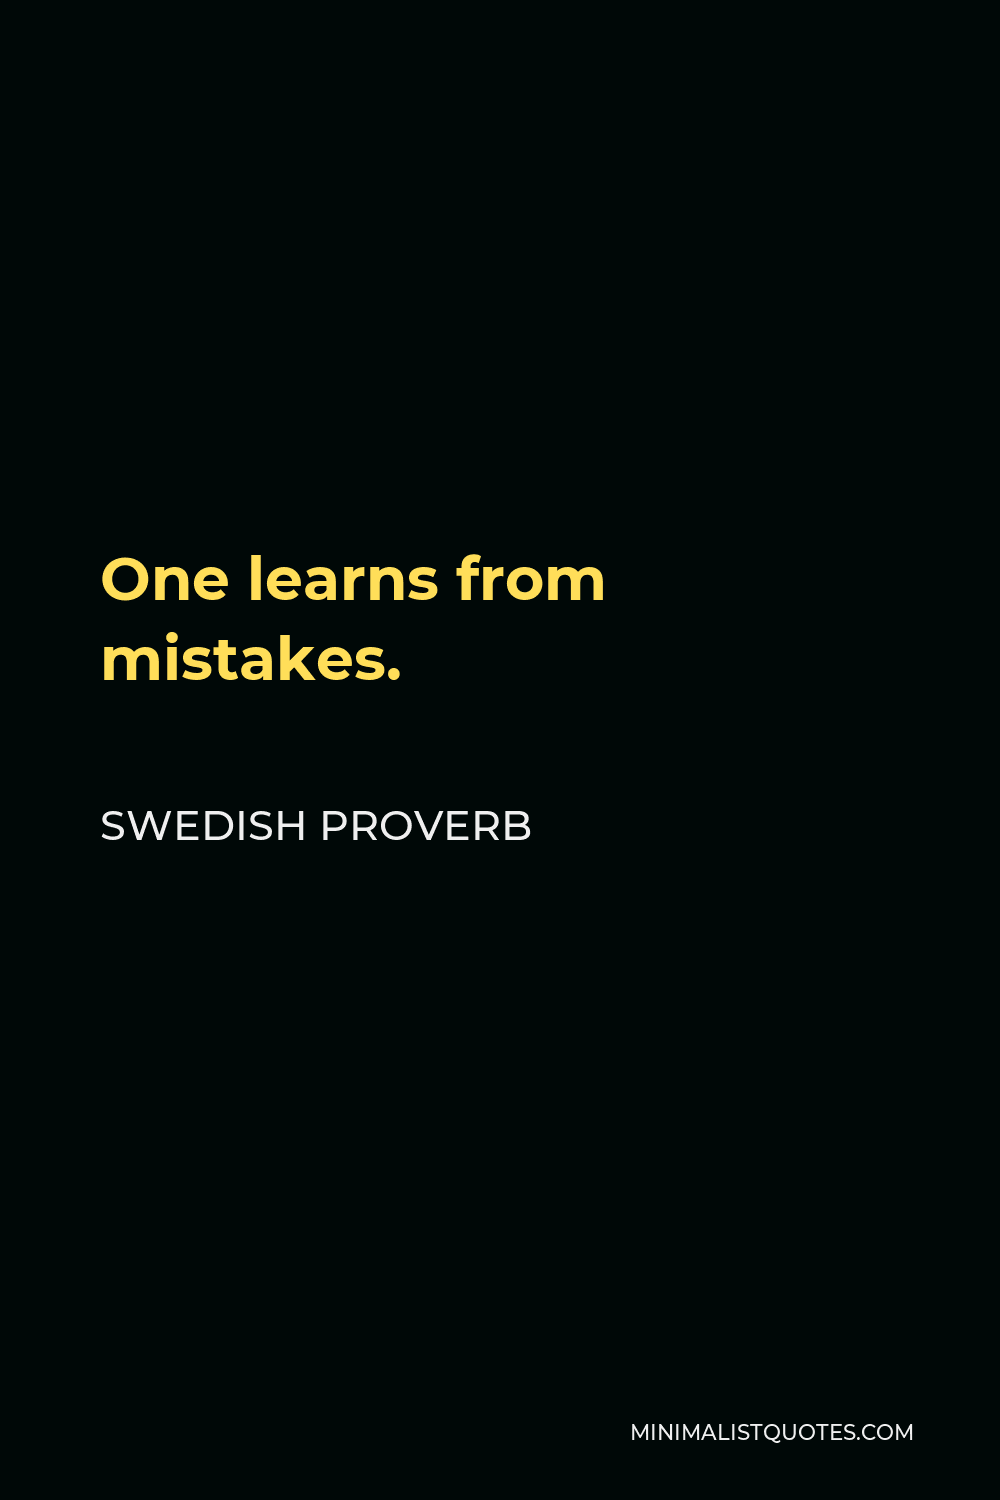 Swedish Proverb Quote - One learns from mistakes.